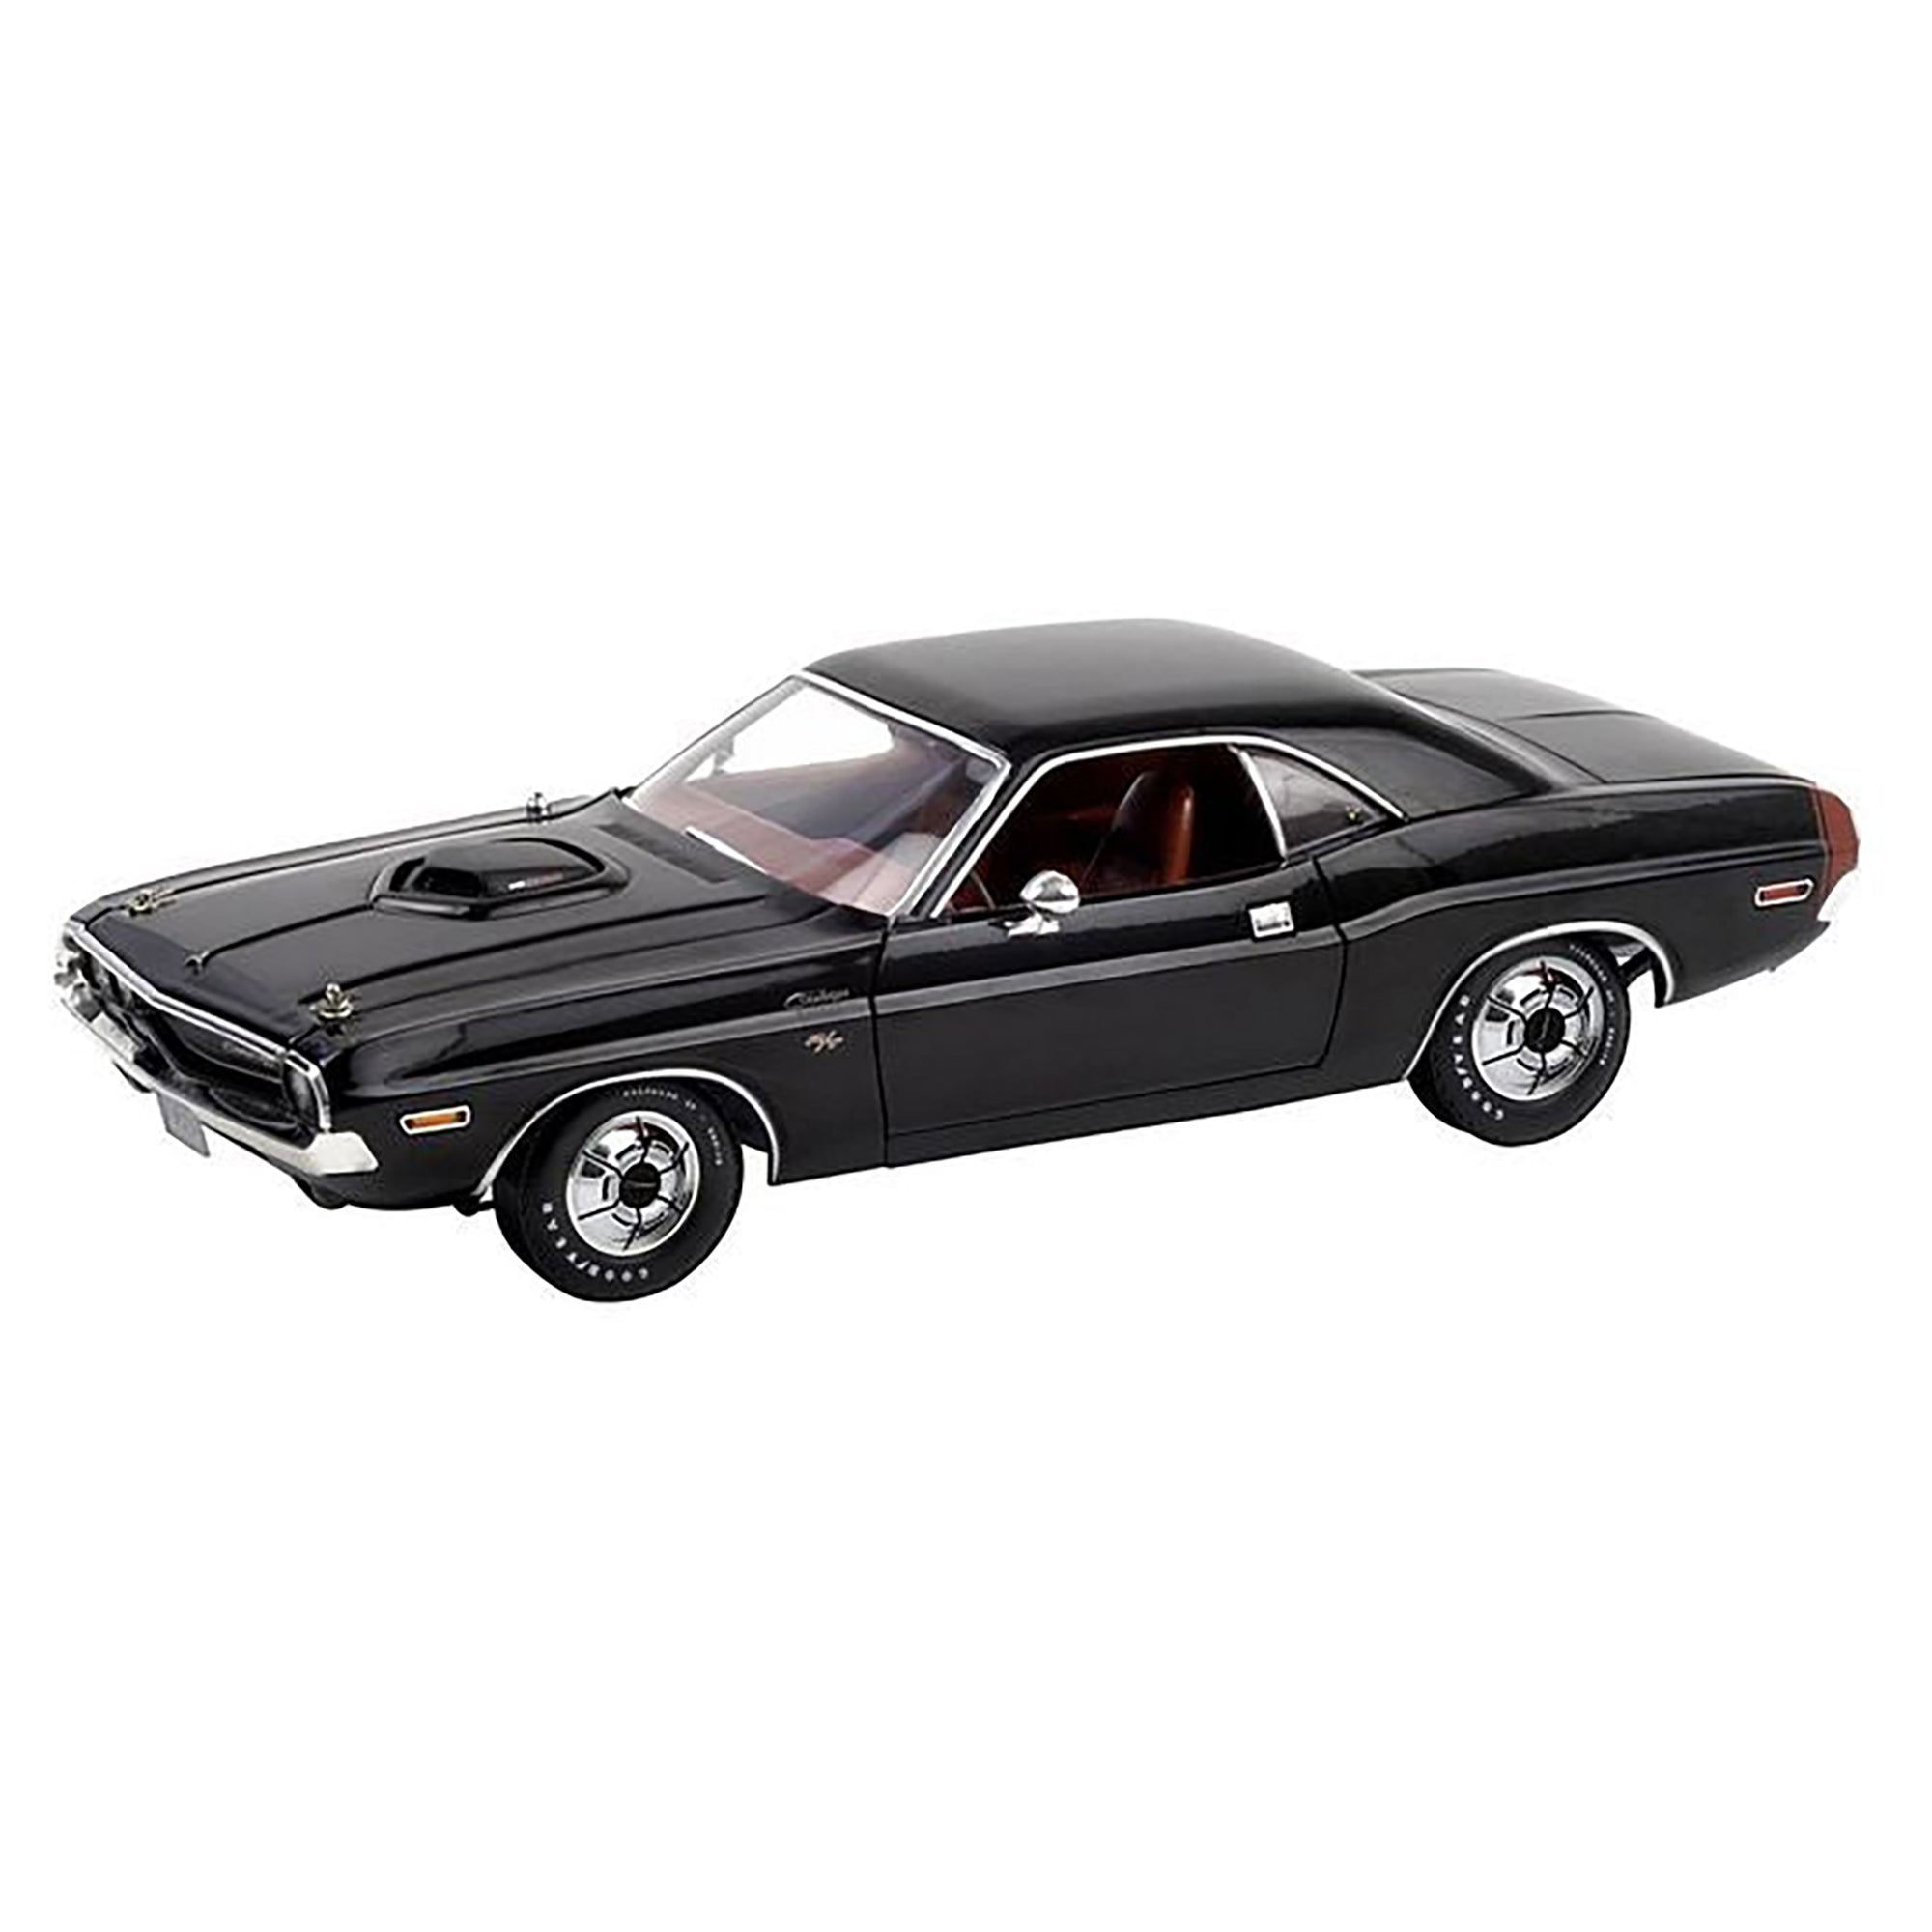 Greenlight 1/18 1970 Dodge Challenger R/T 440 with Red Interior (Pack of 6)